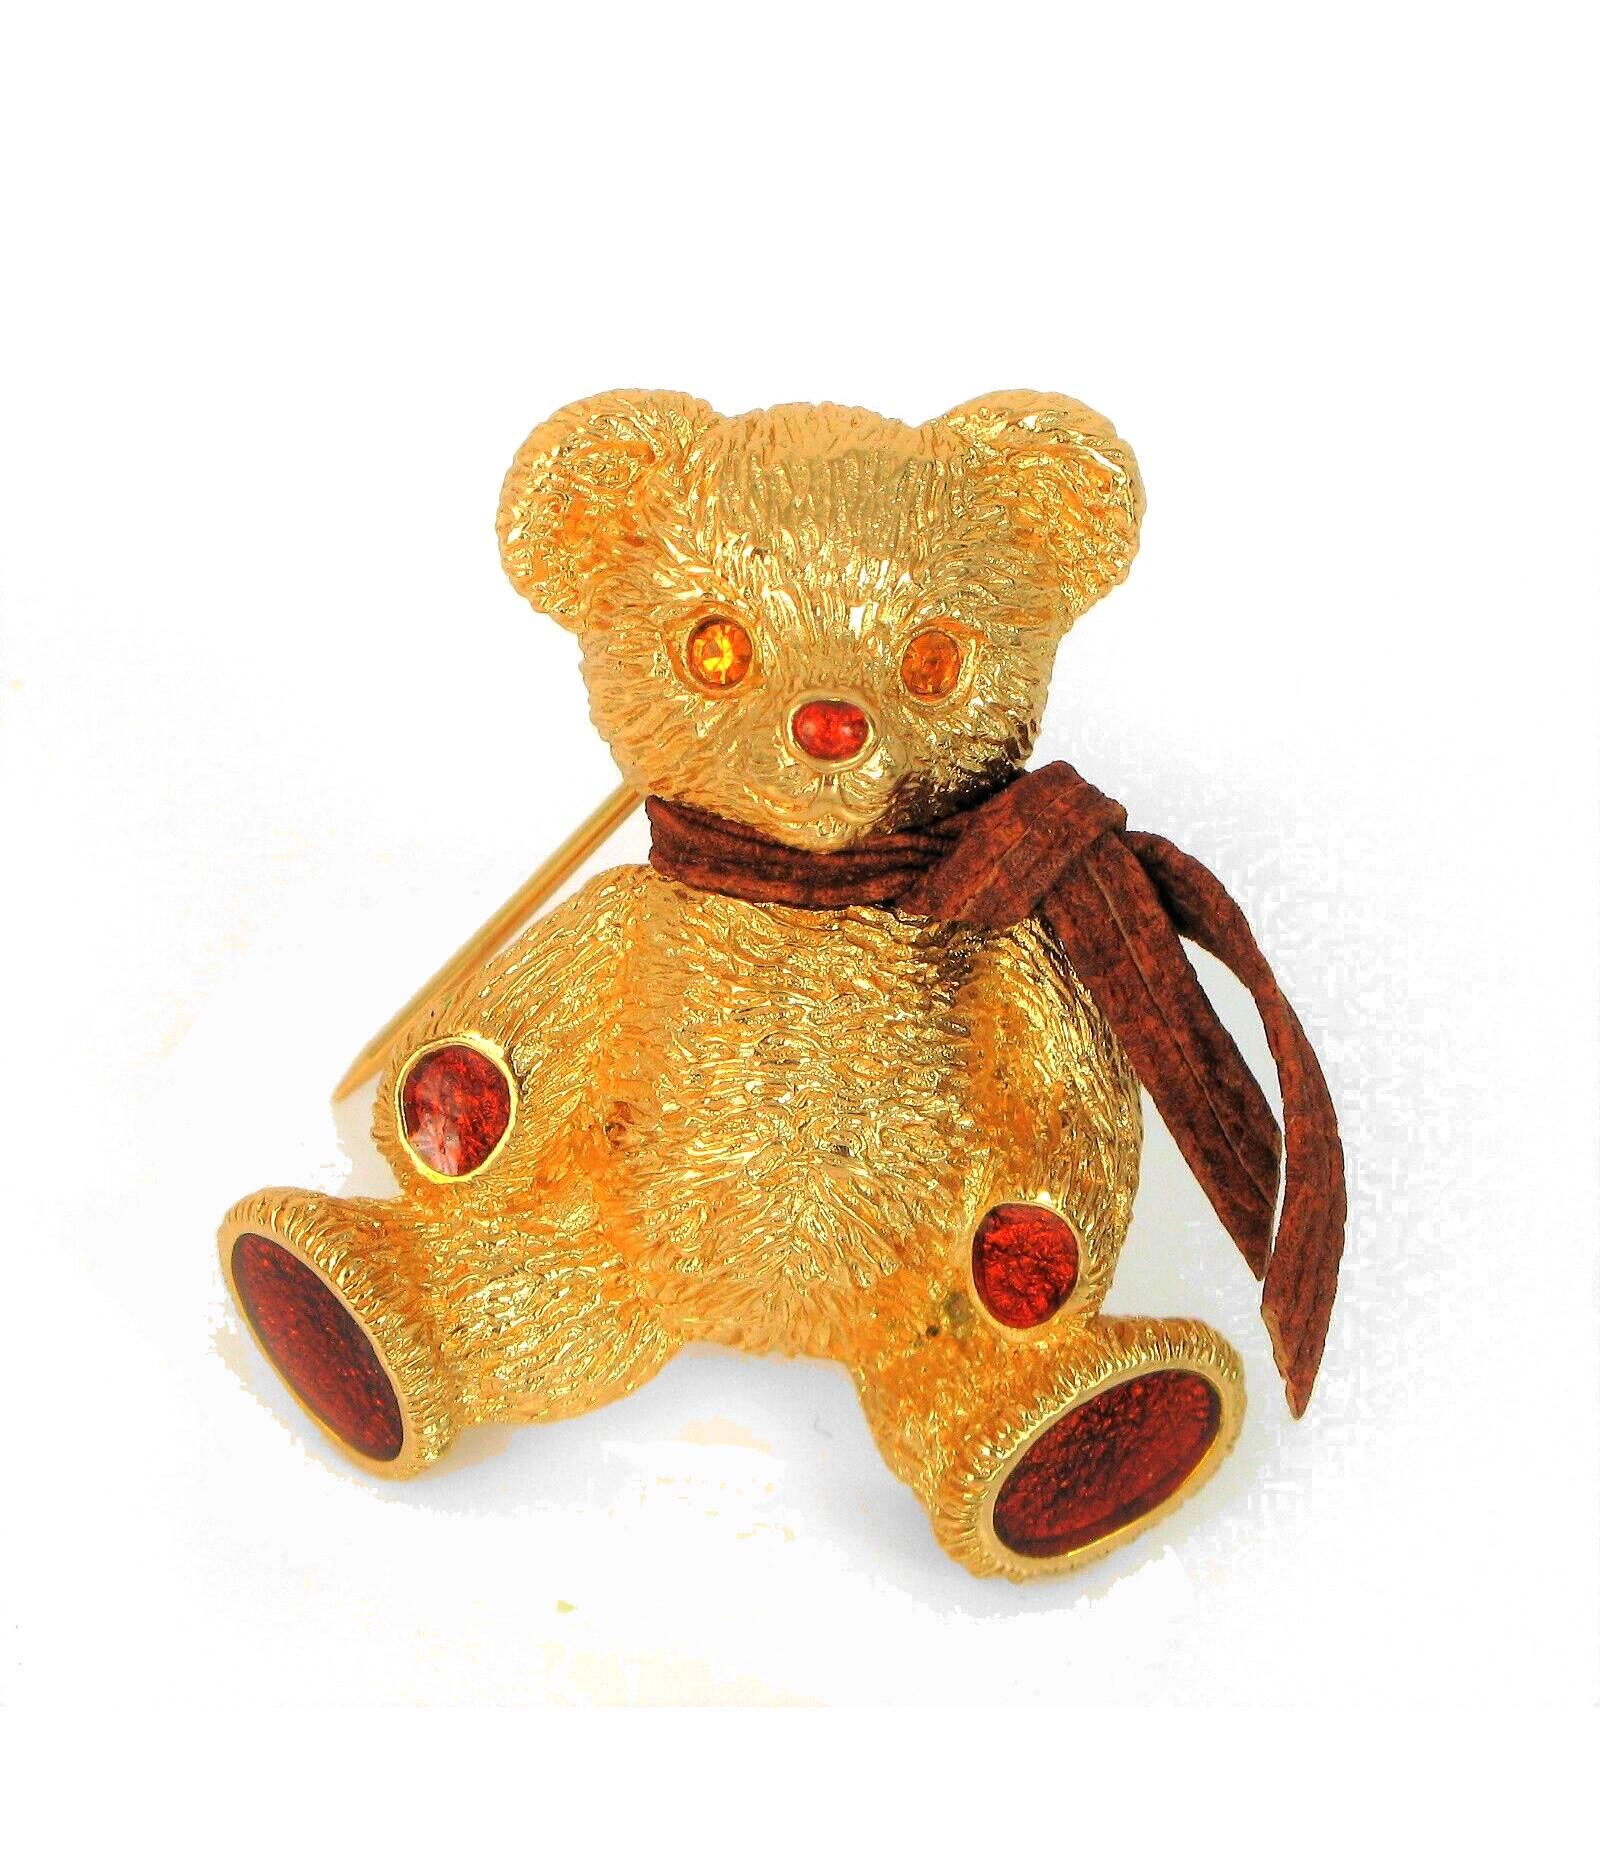 From the 1980s, this Burberrys Gold Tone Metal Teddy Bear Brooch is an exquisite accessory, lovingly enameled for a dazzling finish.

Dimensions: 5x6cm 

Condition: vintage, 1980s, very good, minimal wear 